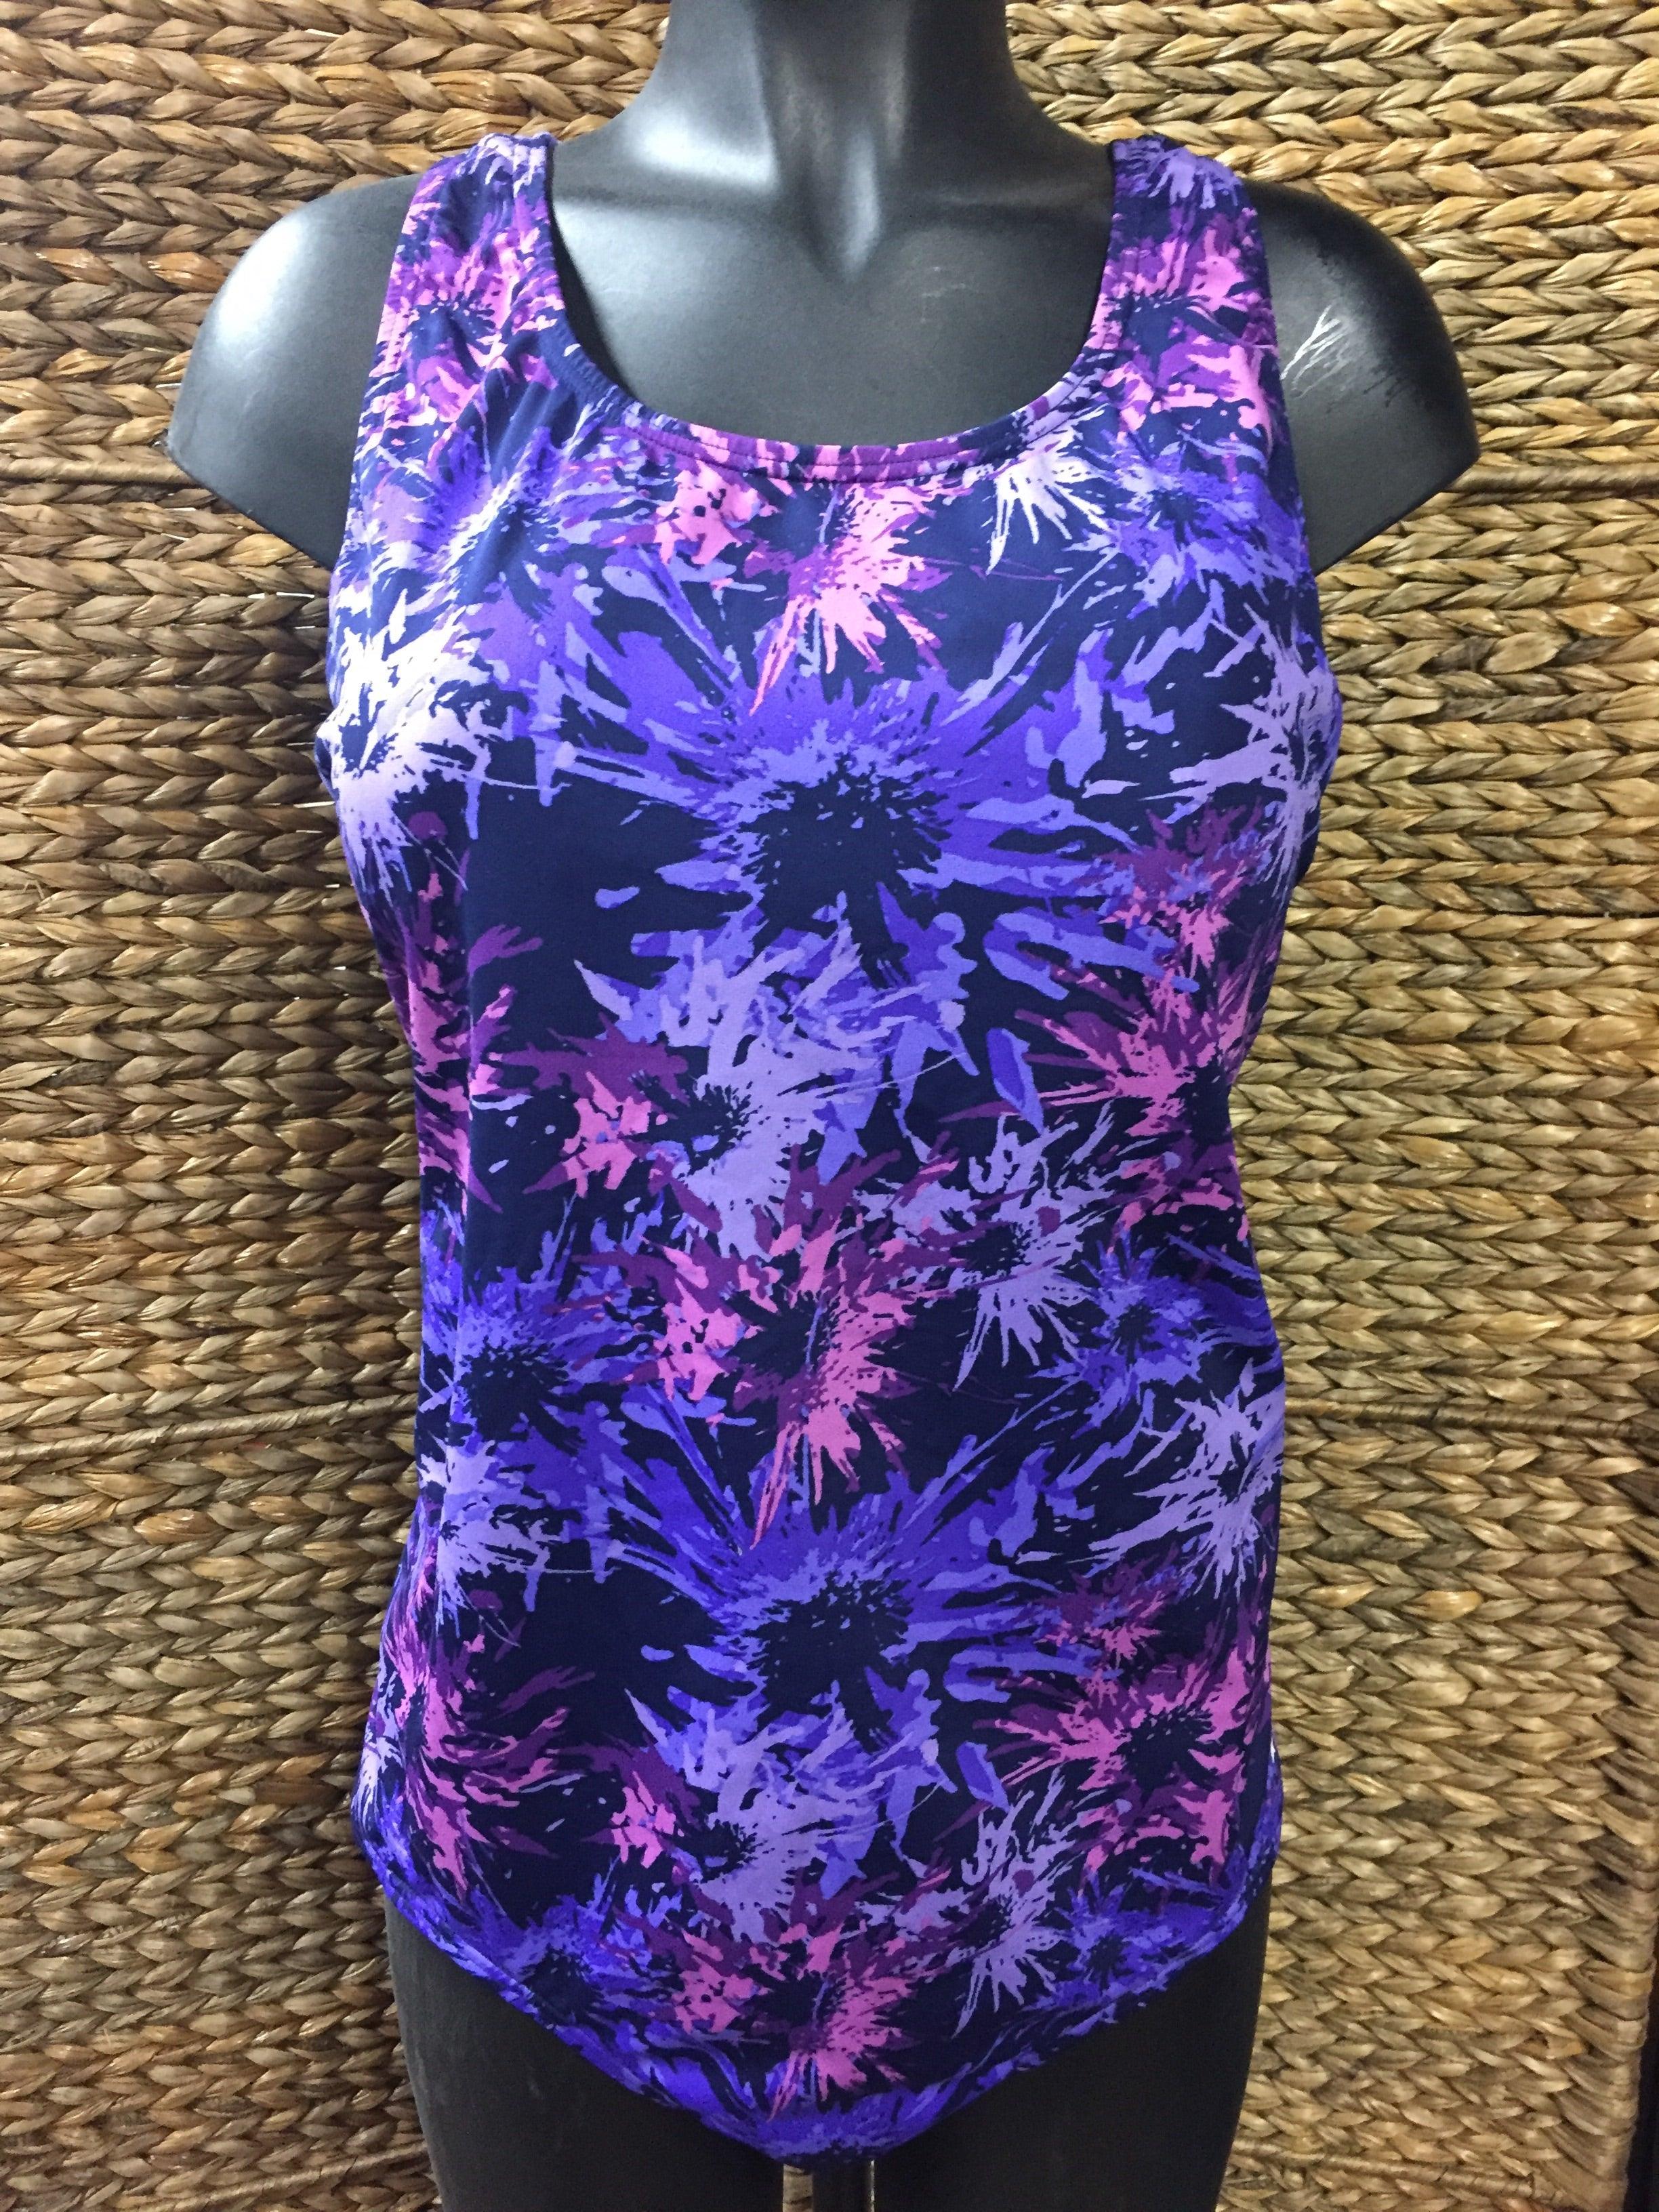 Dolfin Swimsuit, Size 20 - Gild the Lily